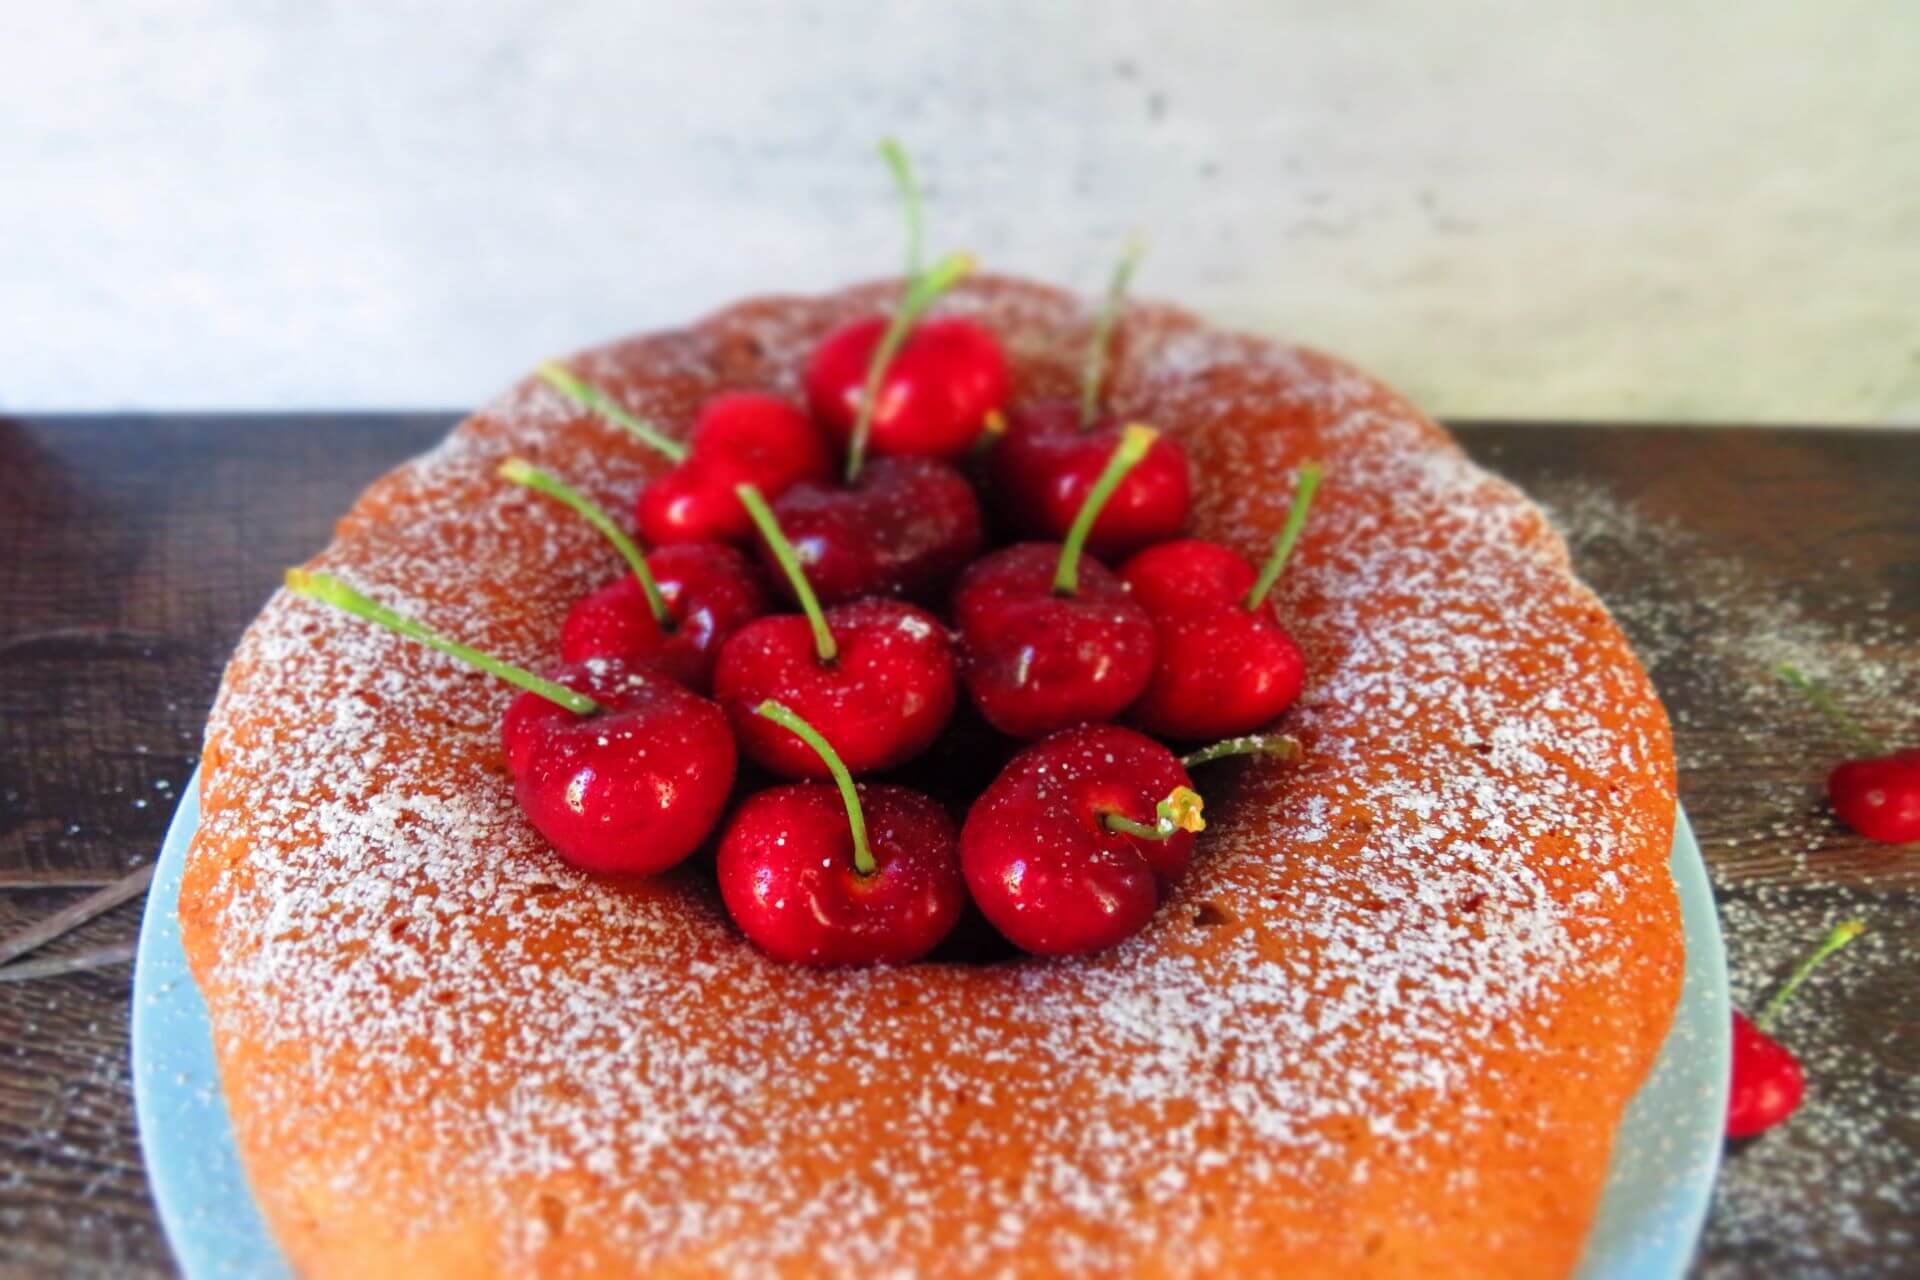 Basque Cake with Cherry Preserve upside down filled with cherries